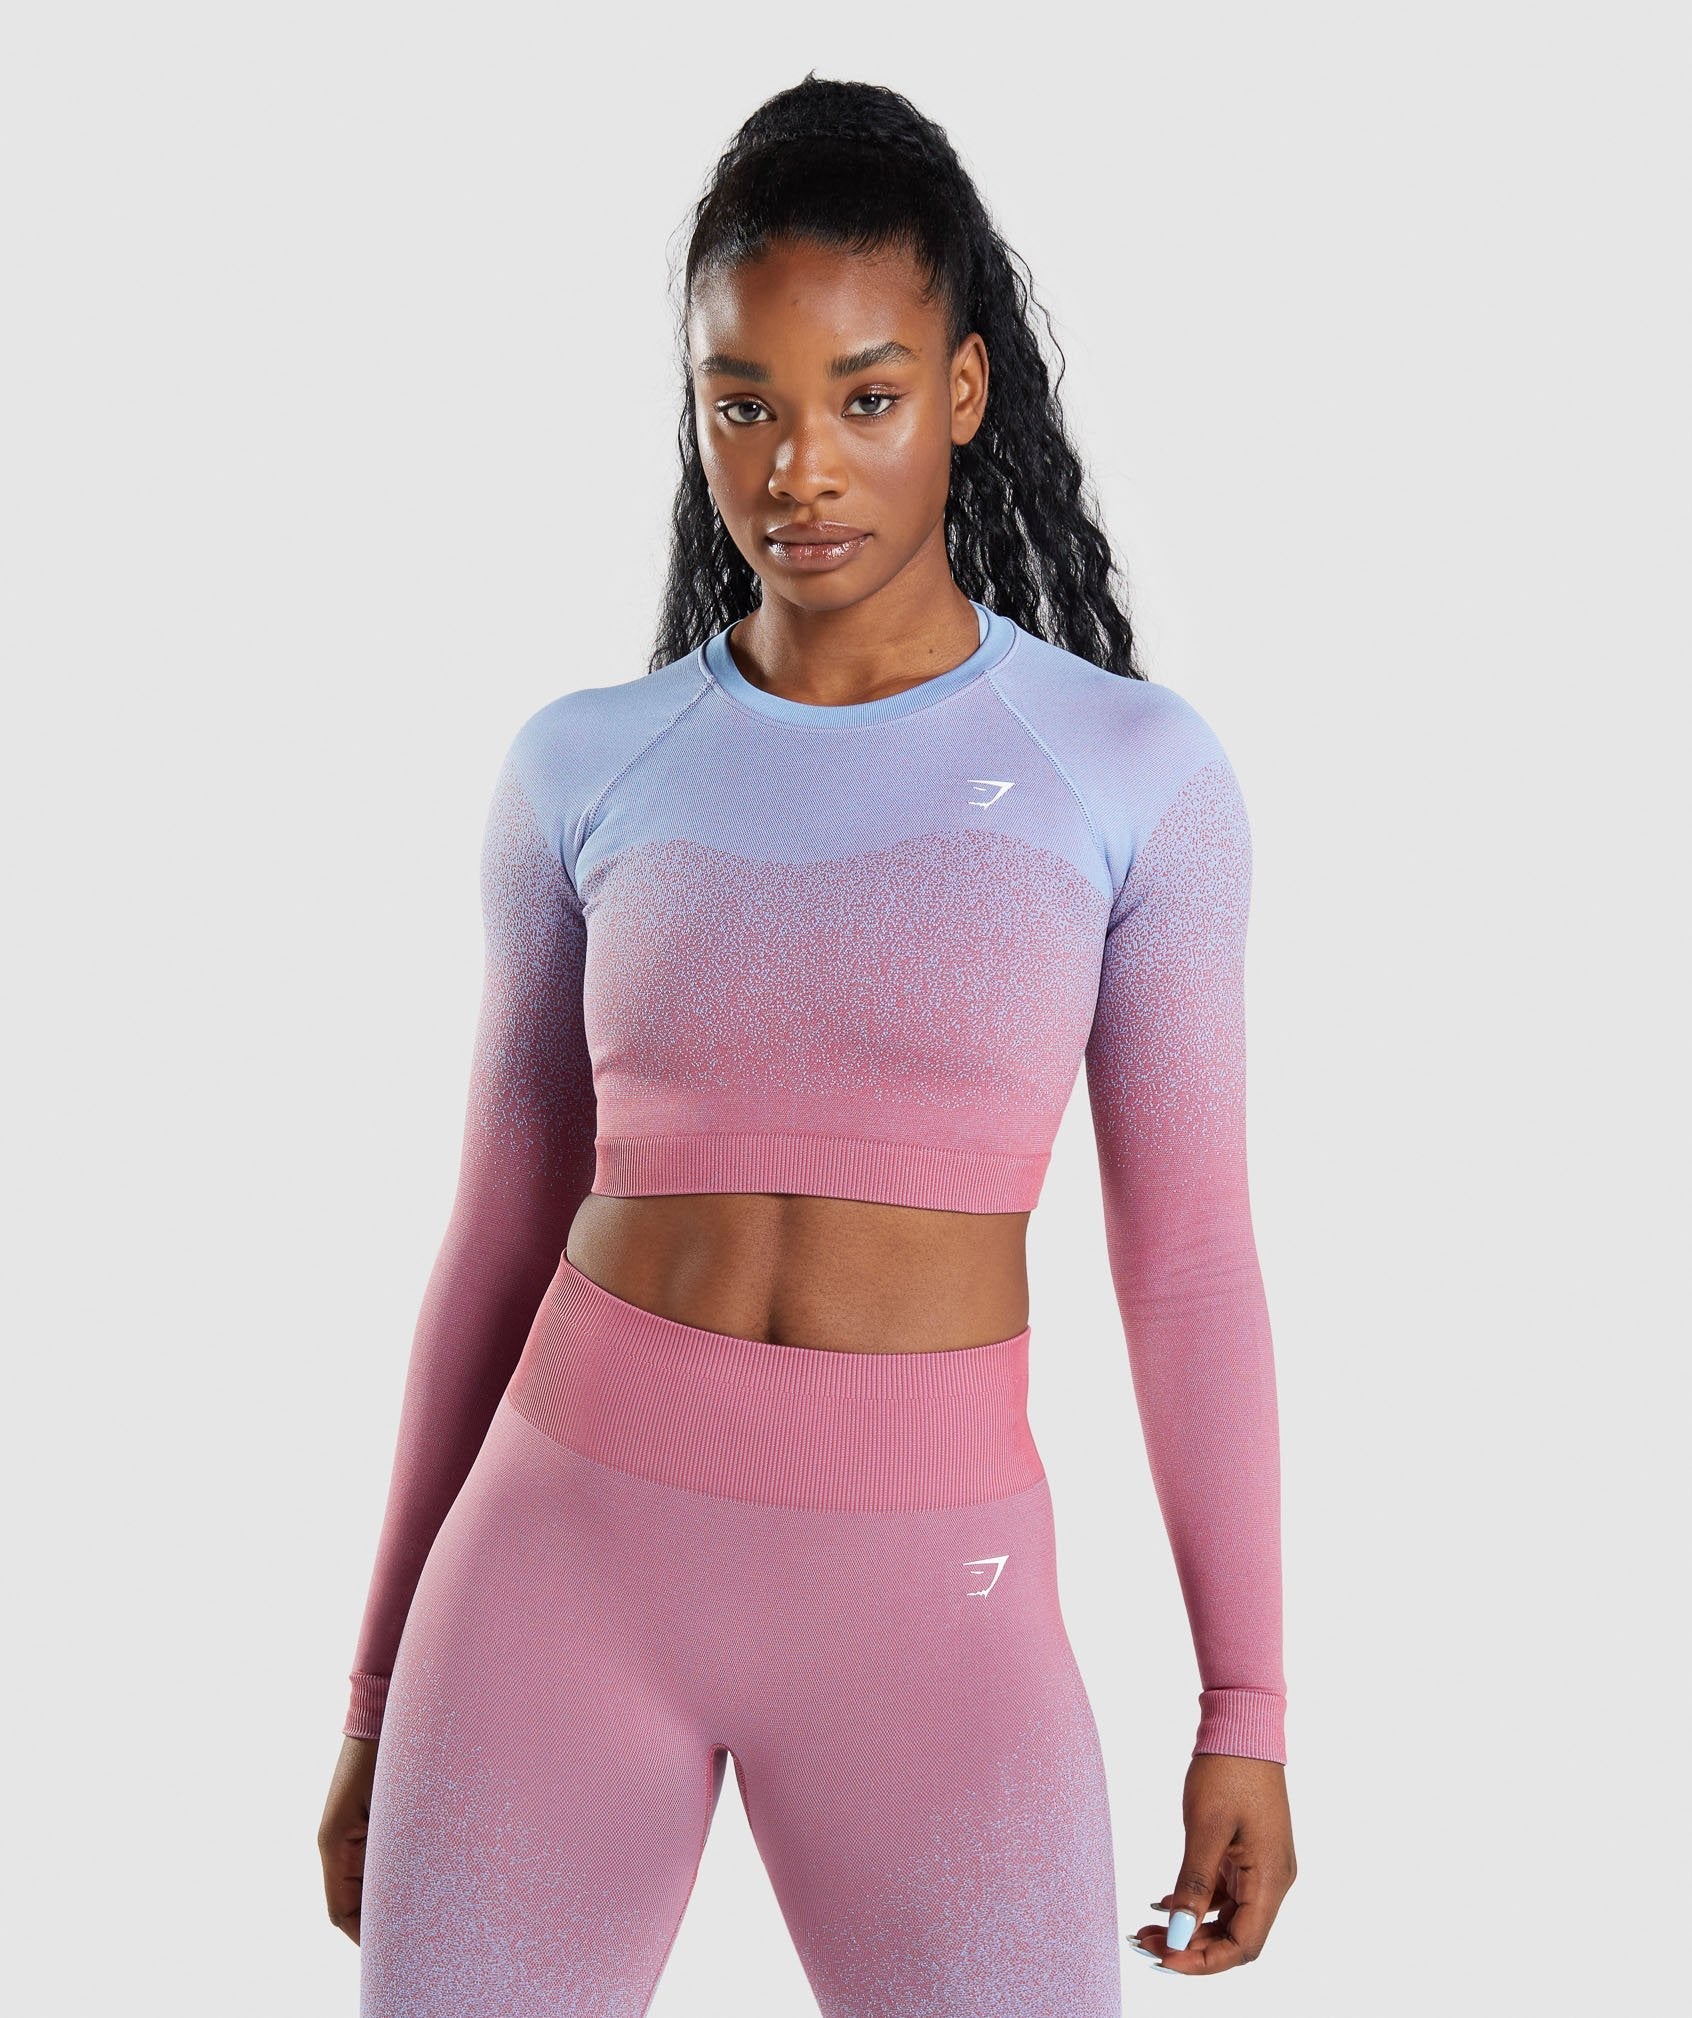 GYMSHARK Adapt Ombre Seamless Sports Bra in Rose Pink/Light Blue, Women's  Fashion, Activewear on Carousell